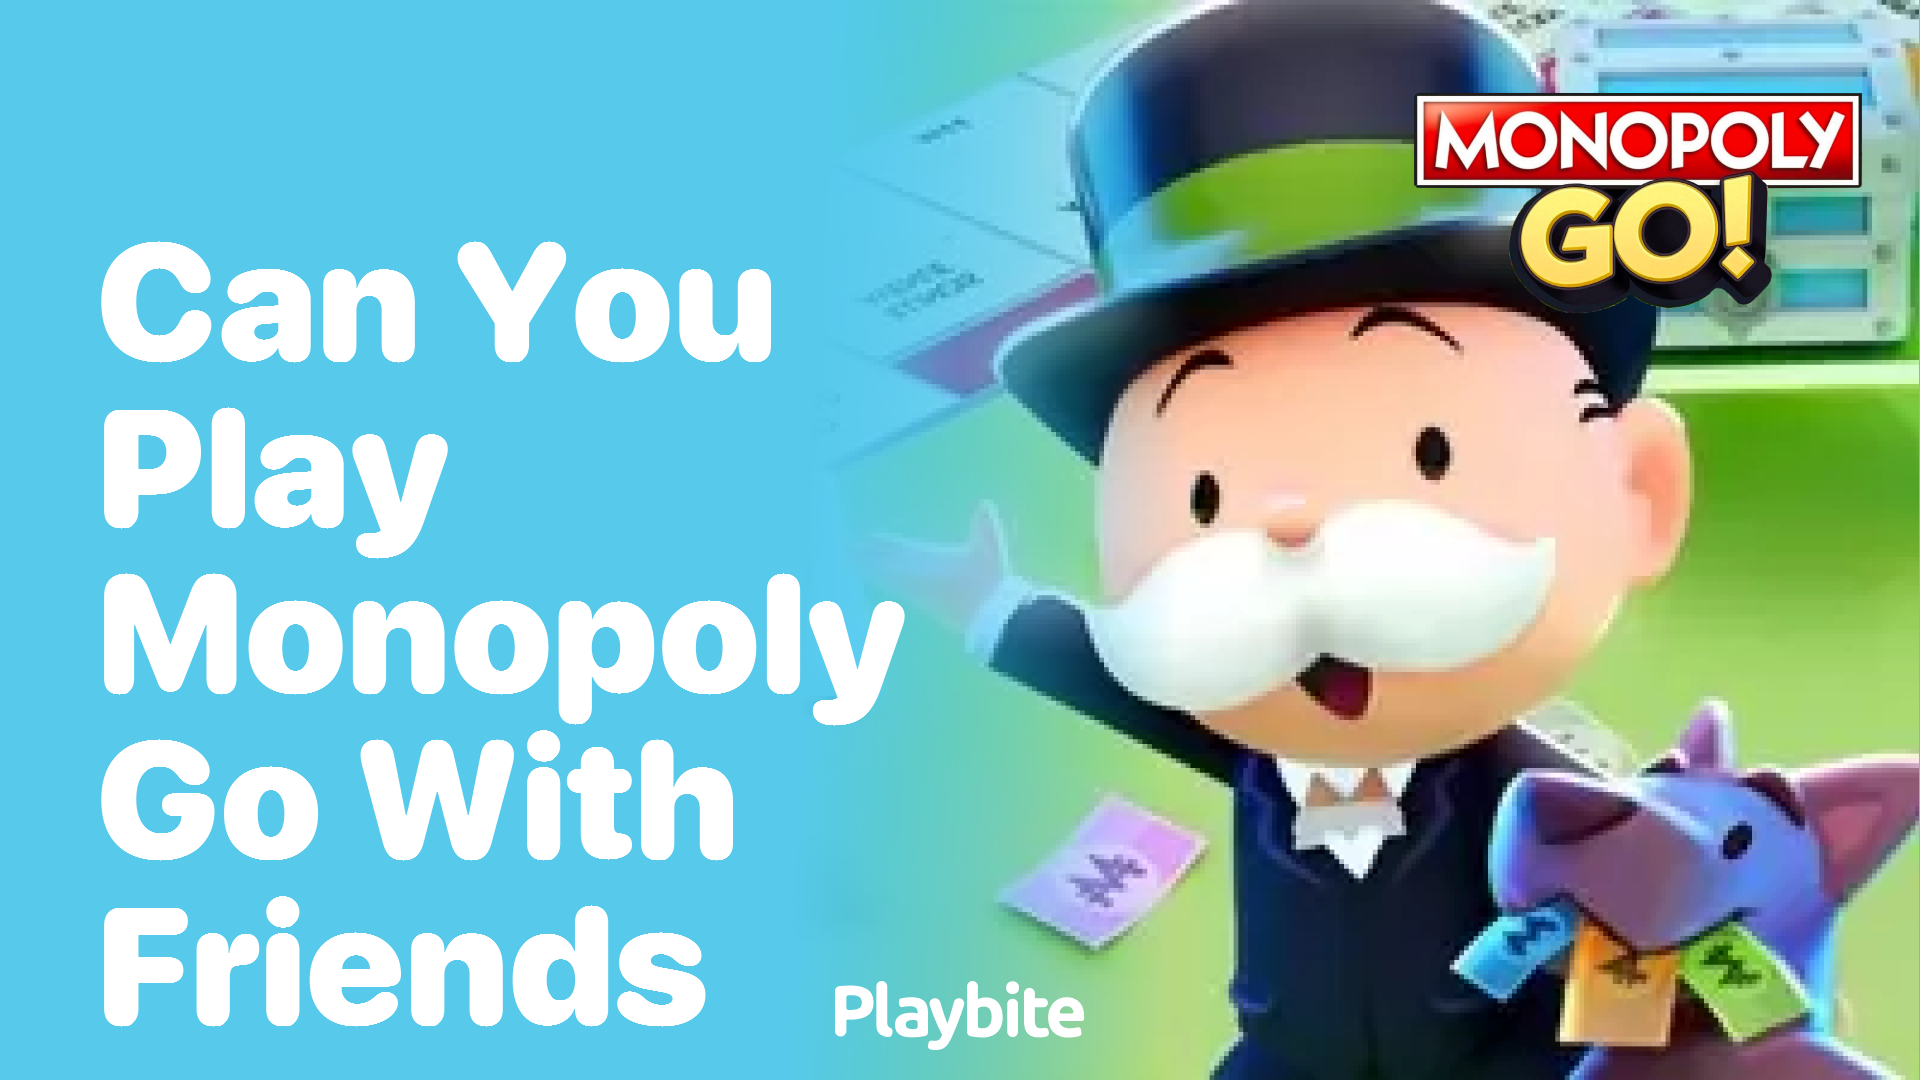 Can You Play Monopoly Go With Friends?